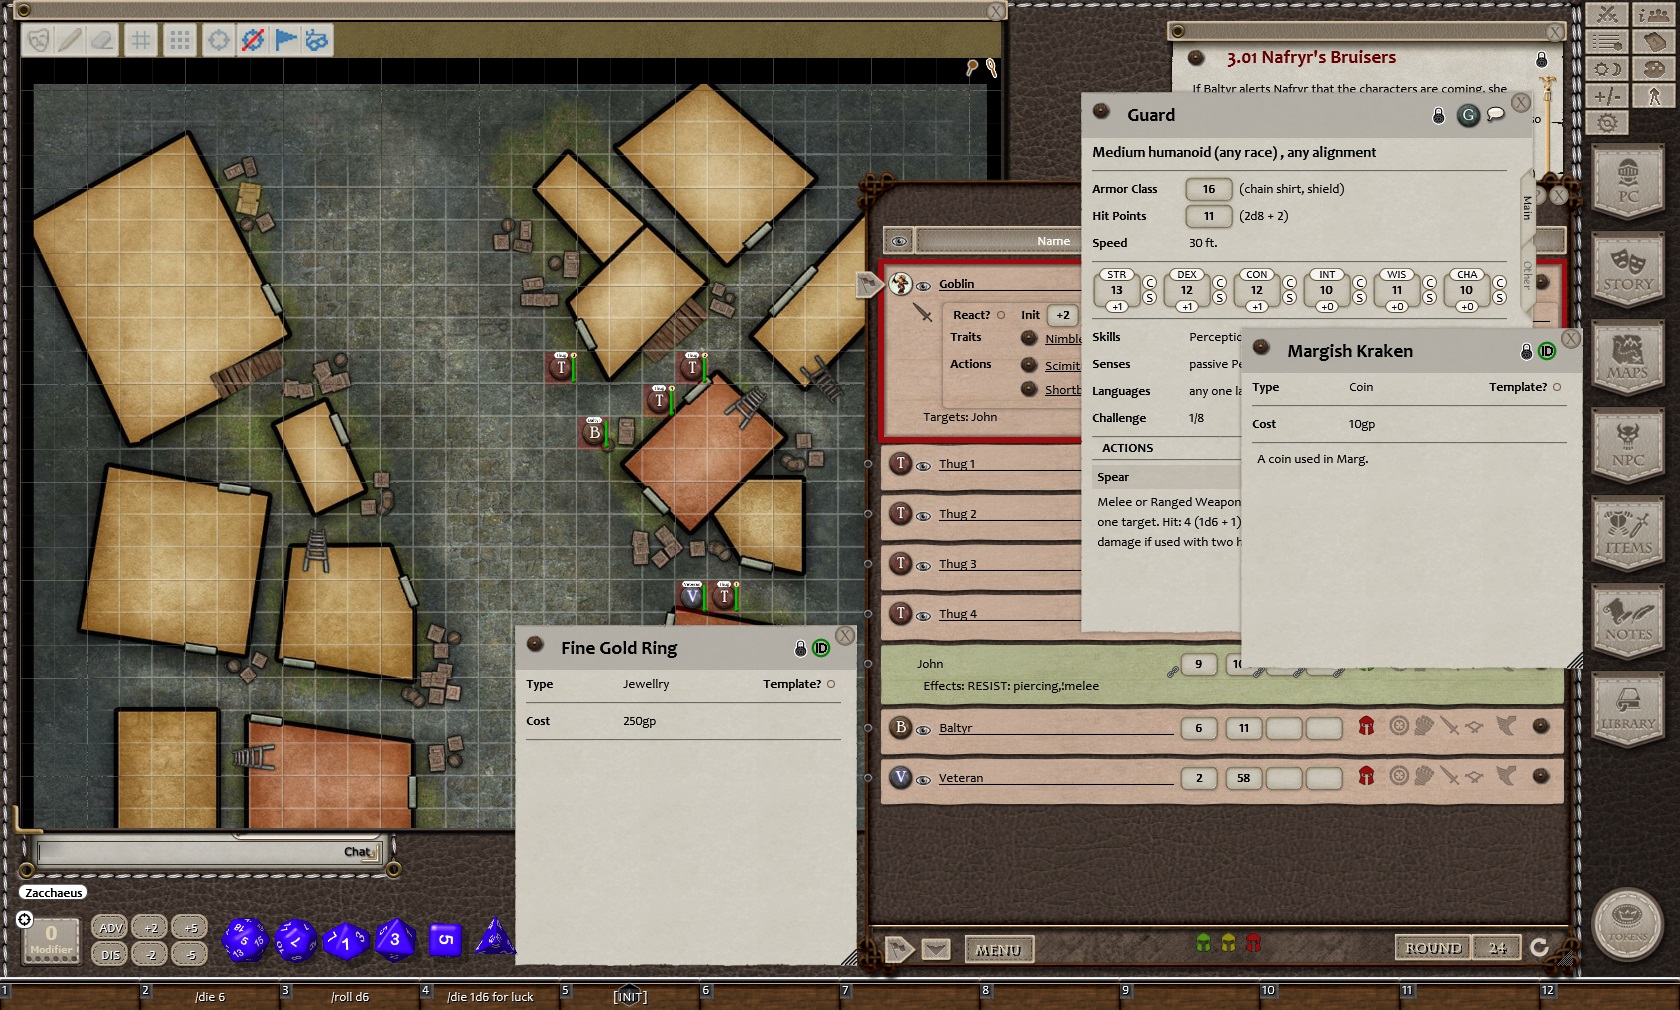 Fantasy Grounds - 5E: Primeval Thule: Red Chains screenshot